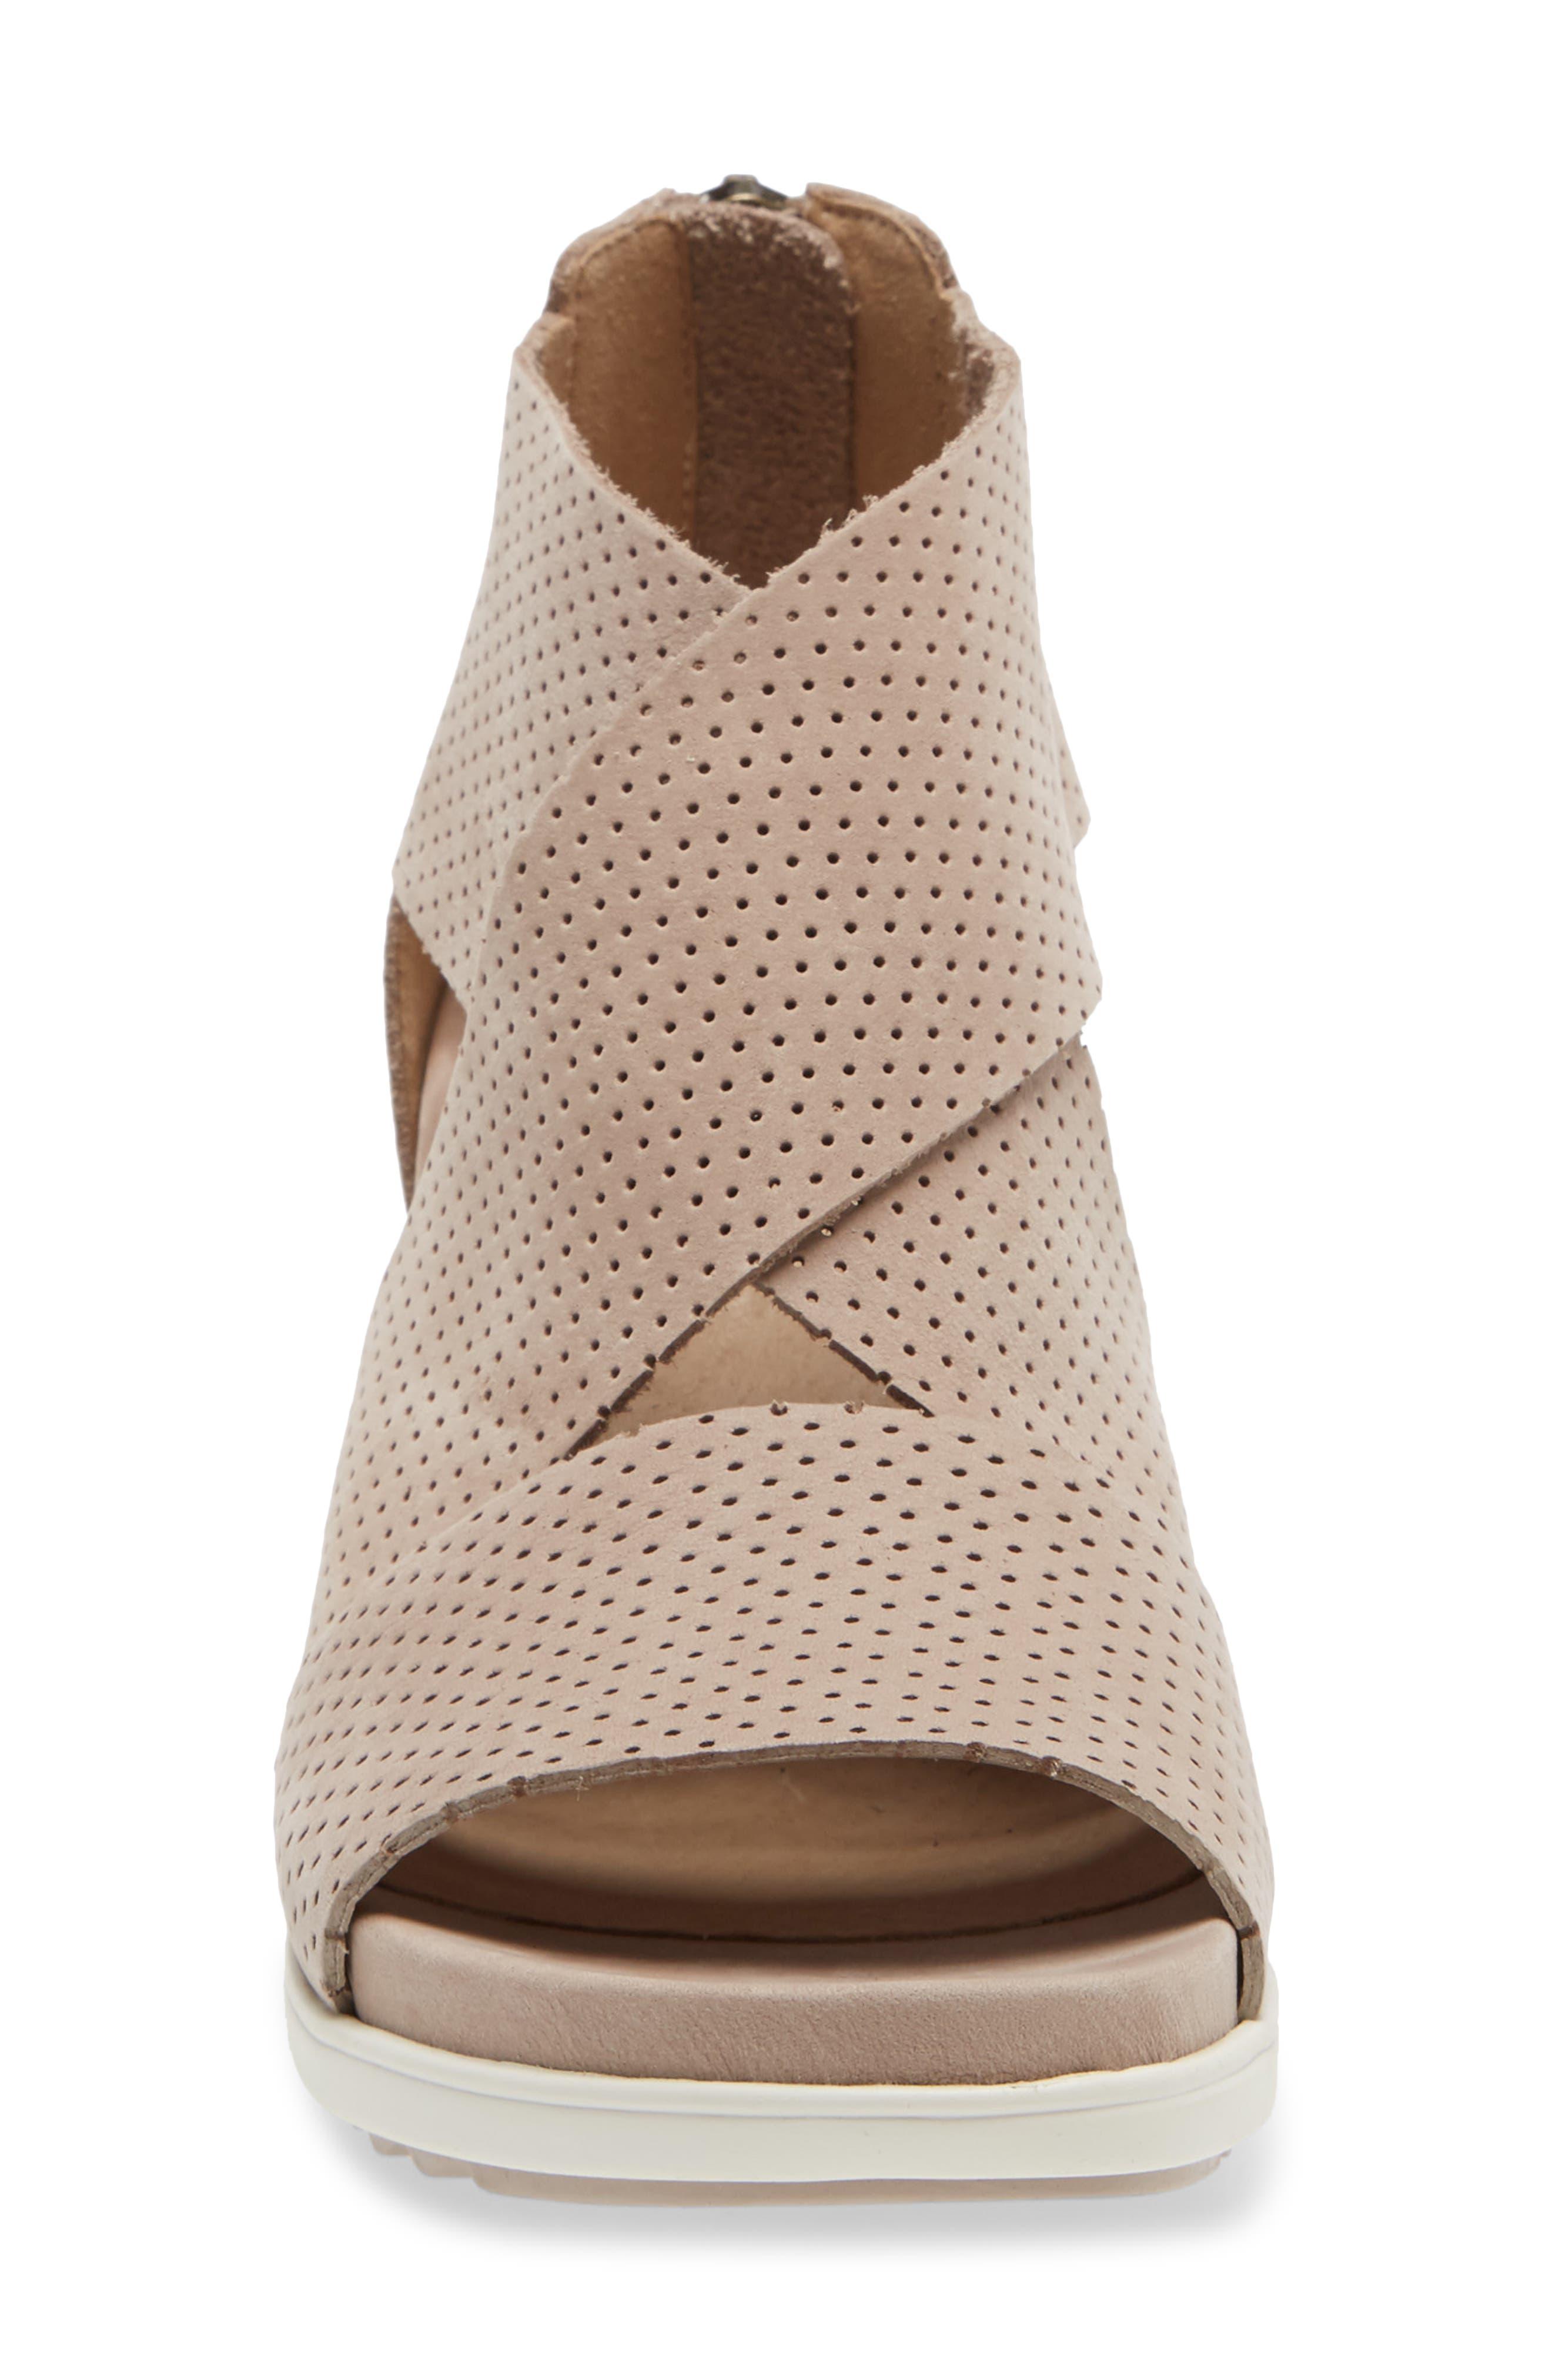 Eileen Fisher Voice Wedge Sandal In Earth Tumbled Nubuck At Nordstrom Rack  | Lyst